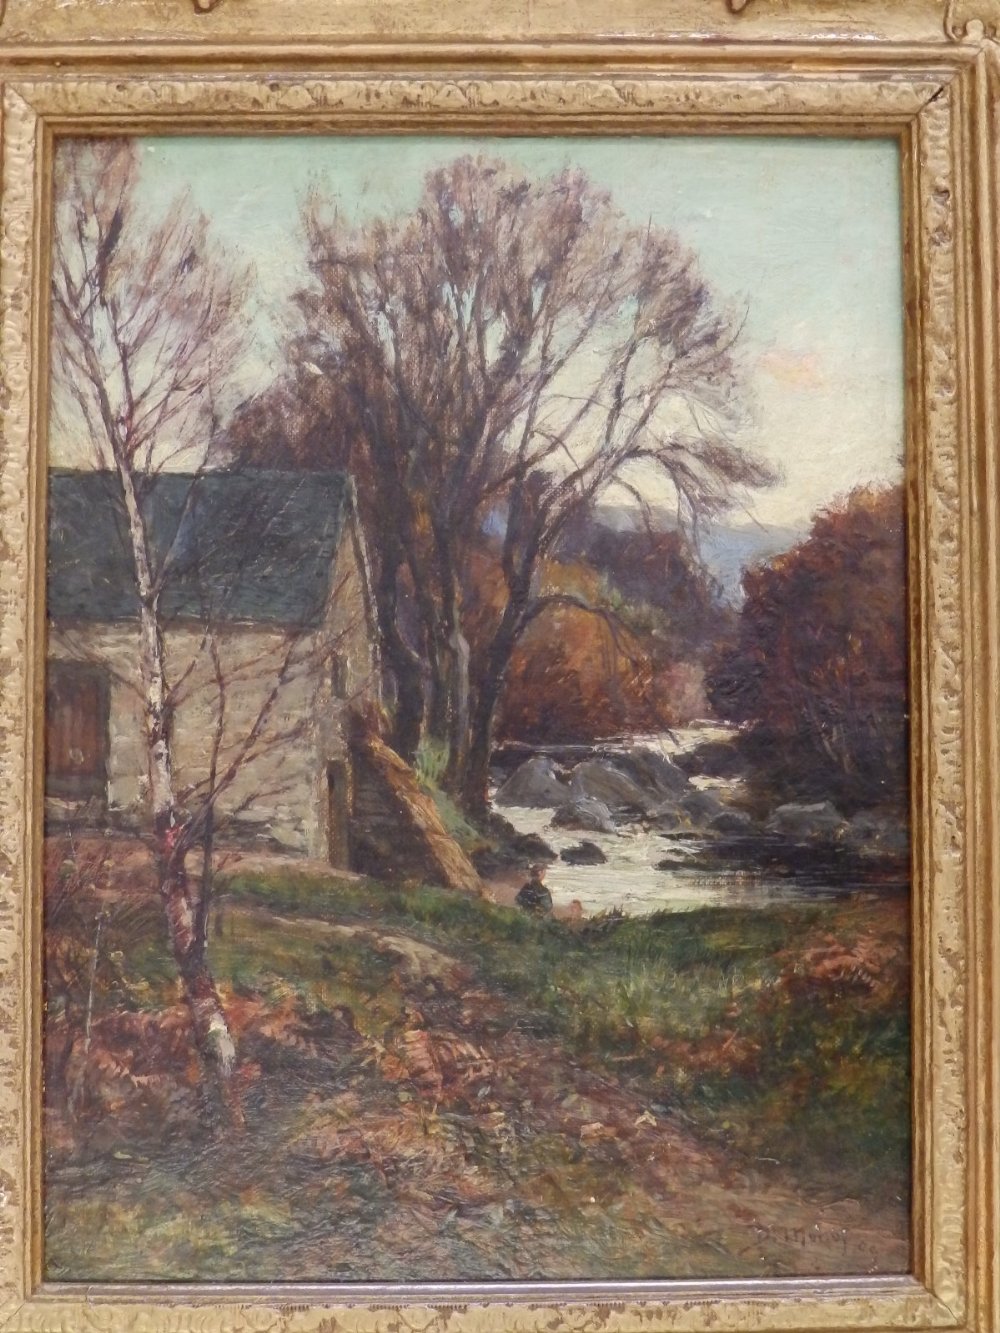 Sir David Murray – oil on re-lined canvas – River scene with building, signed, 11.5” x 8.5”